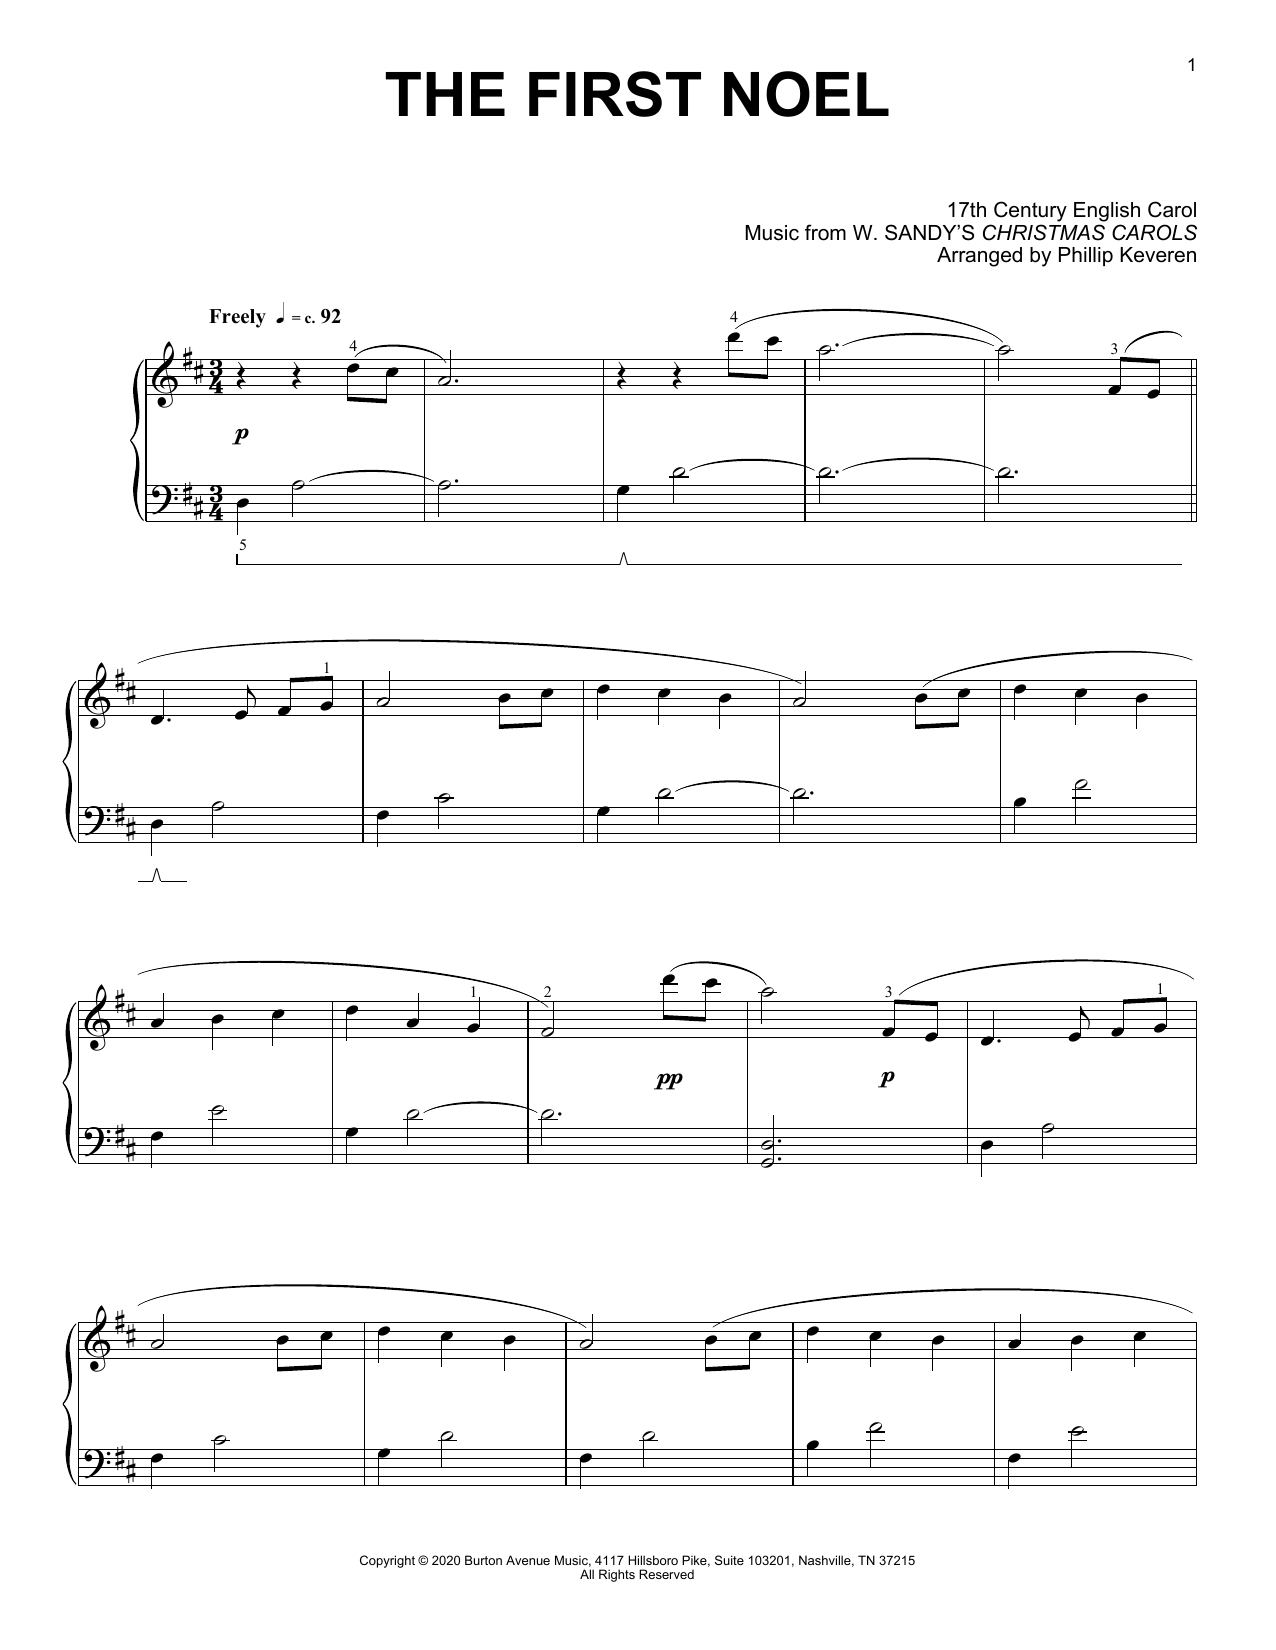 17th Century English Carol The First Noel (arr. Phillip Keveren) sheet music notes and chords. Download Printable PDF.